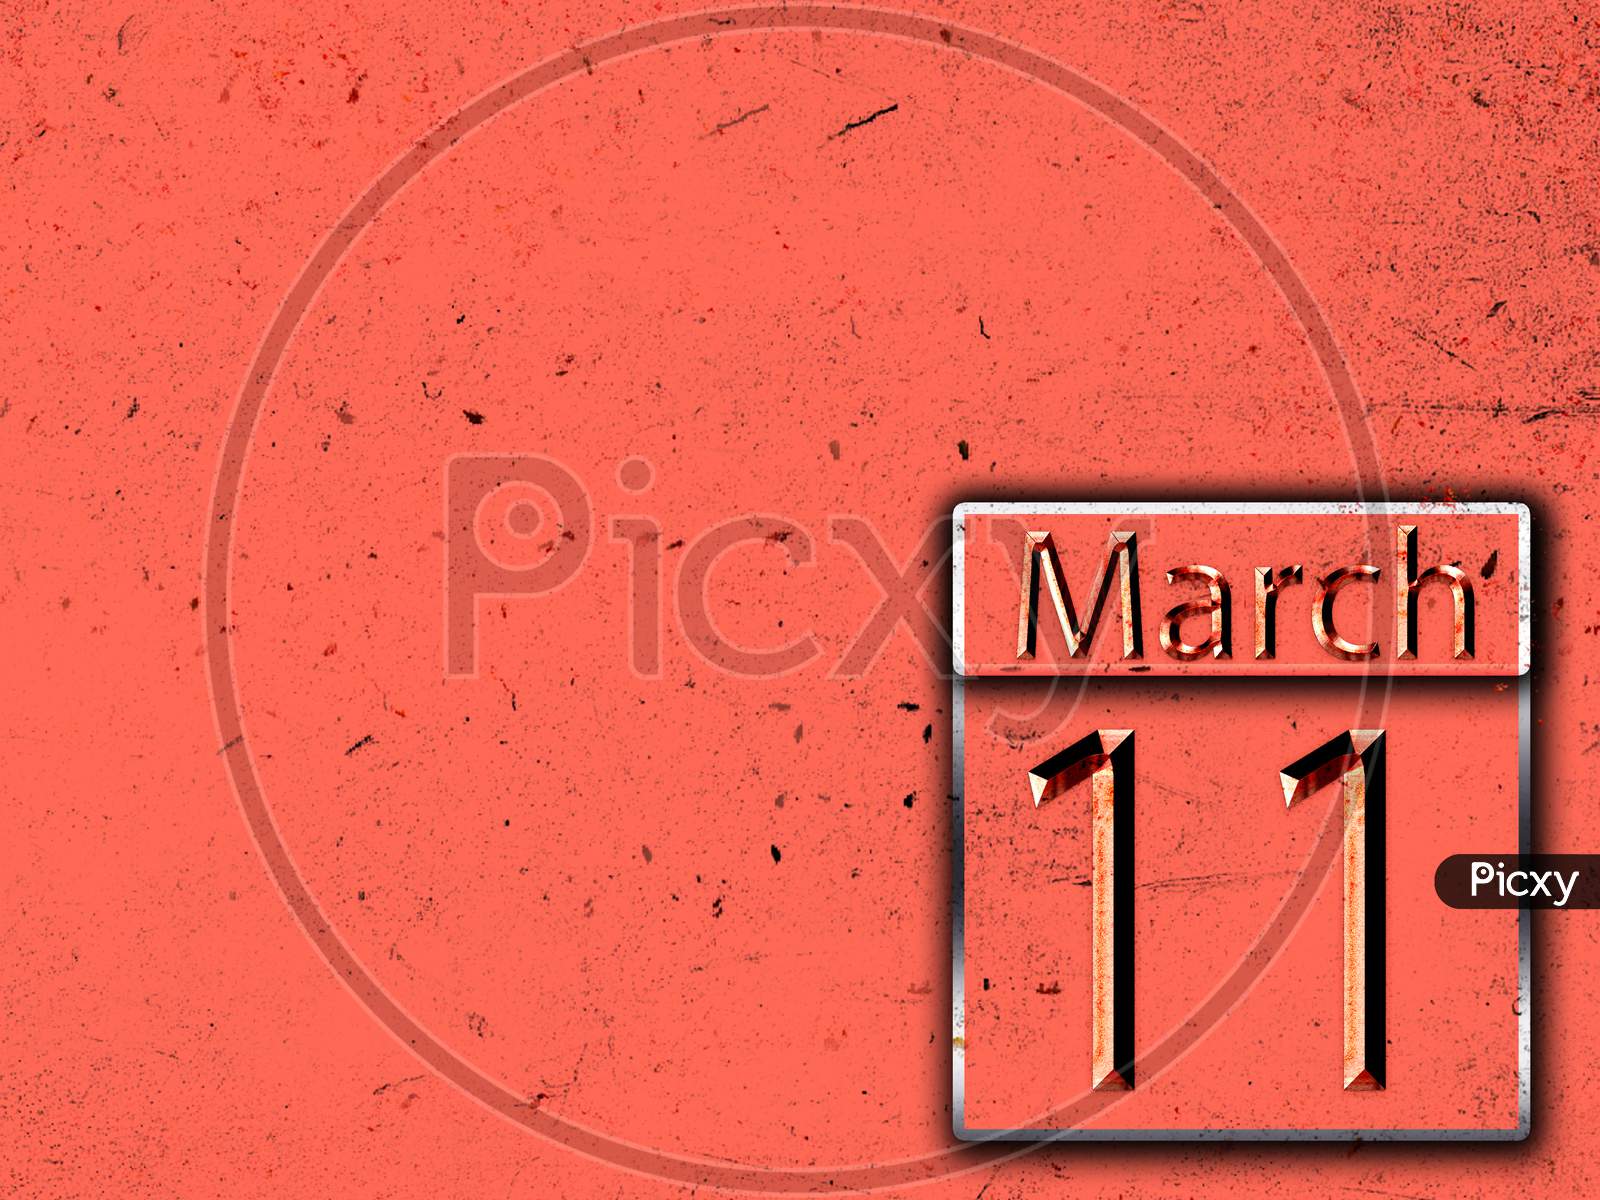 11 March, Monthly Calendar On Backgrand